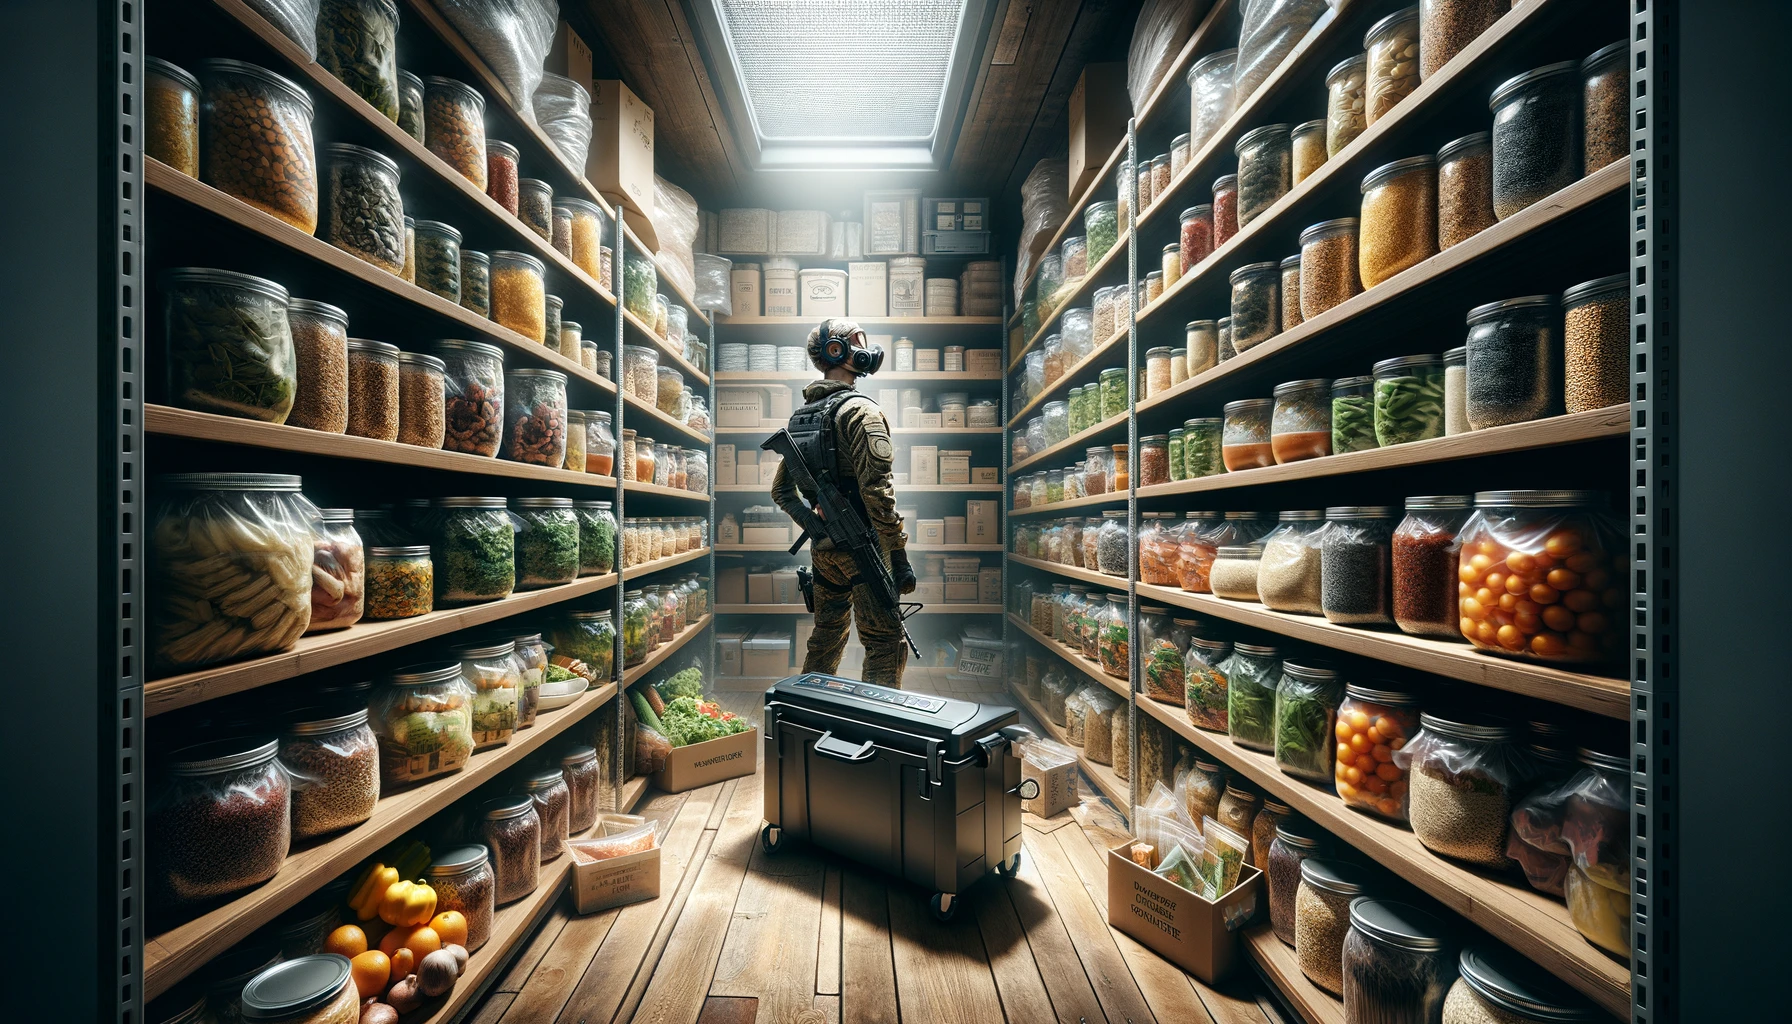 A storage room filled with shelves of vacuum-sealed foods, illustrating the benefits of extended shelf life and reduced waste, with a prepper inspecting the organized preservation results, emphasizing food security and sustainability